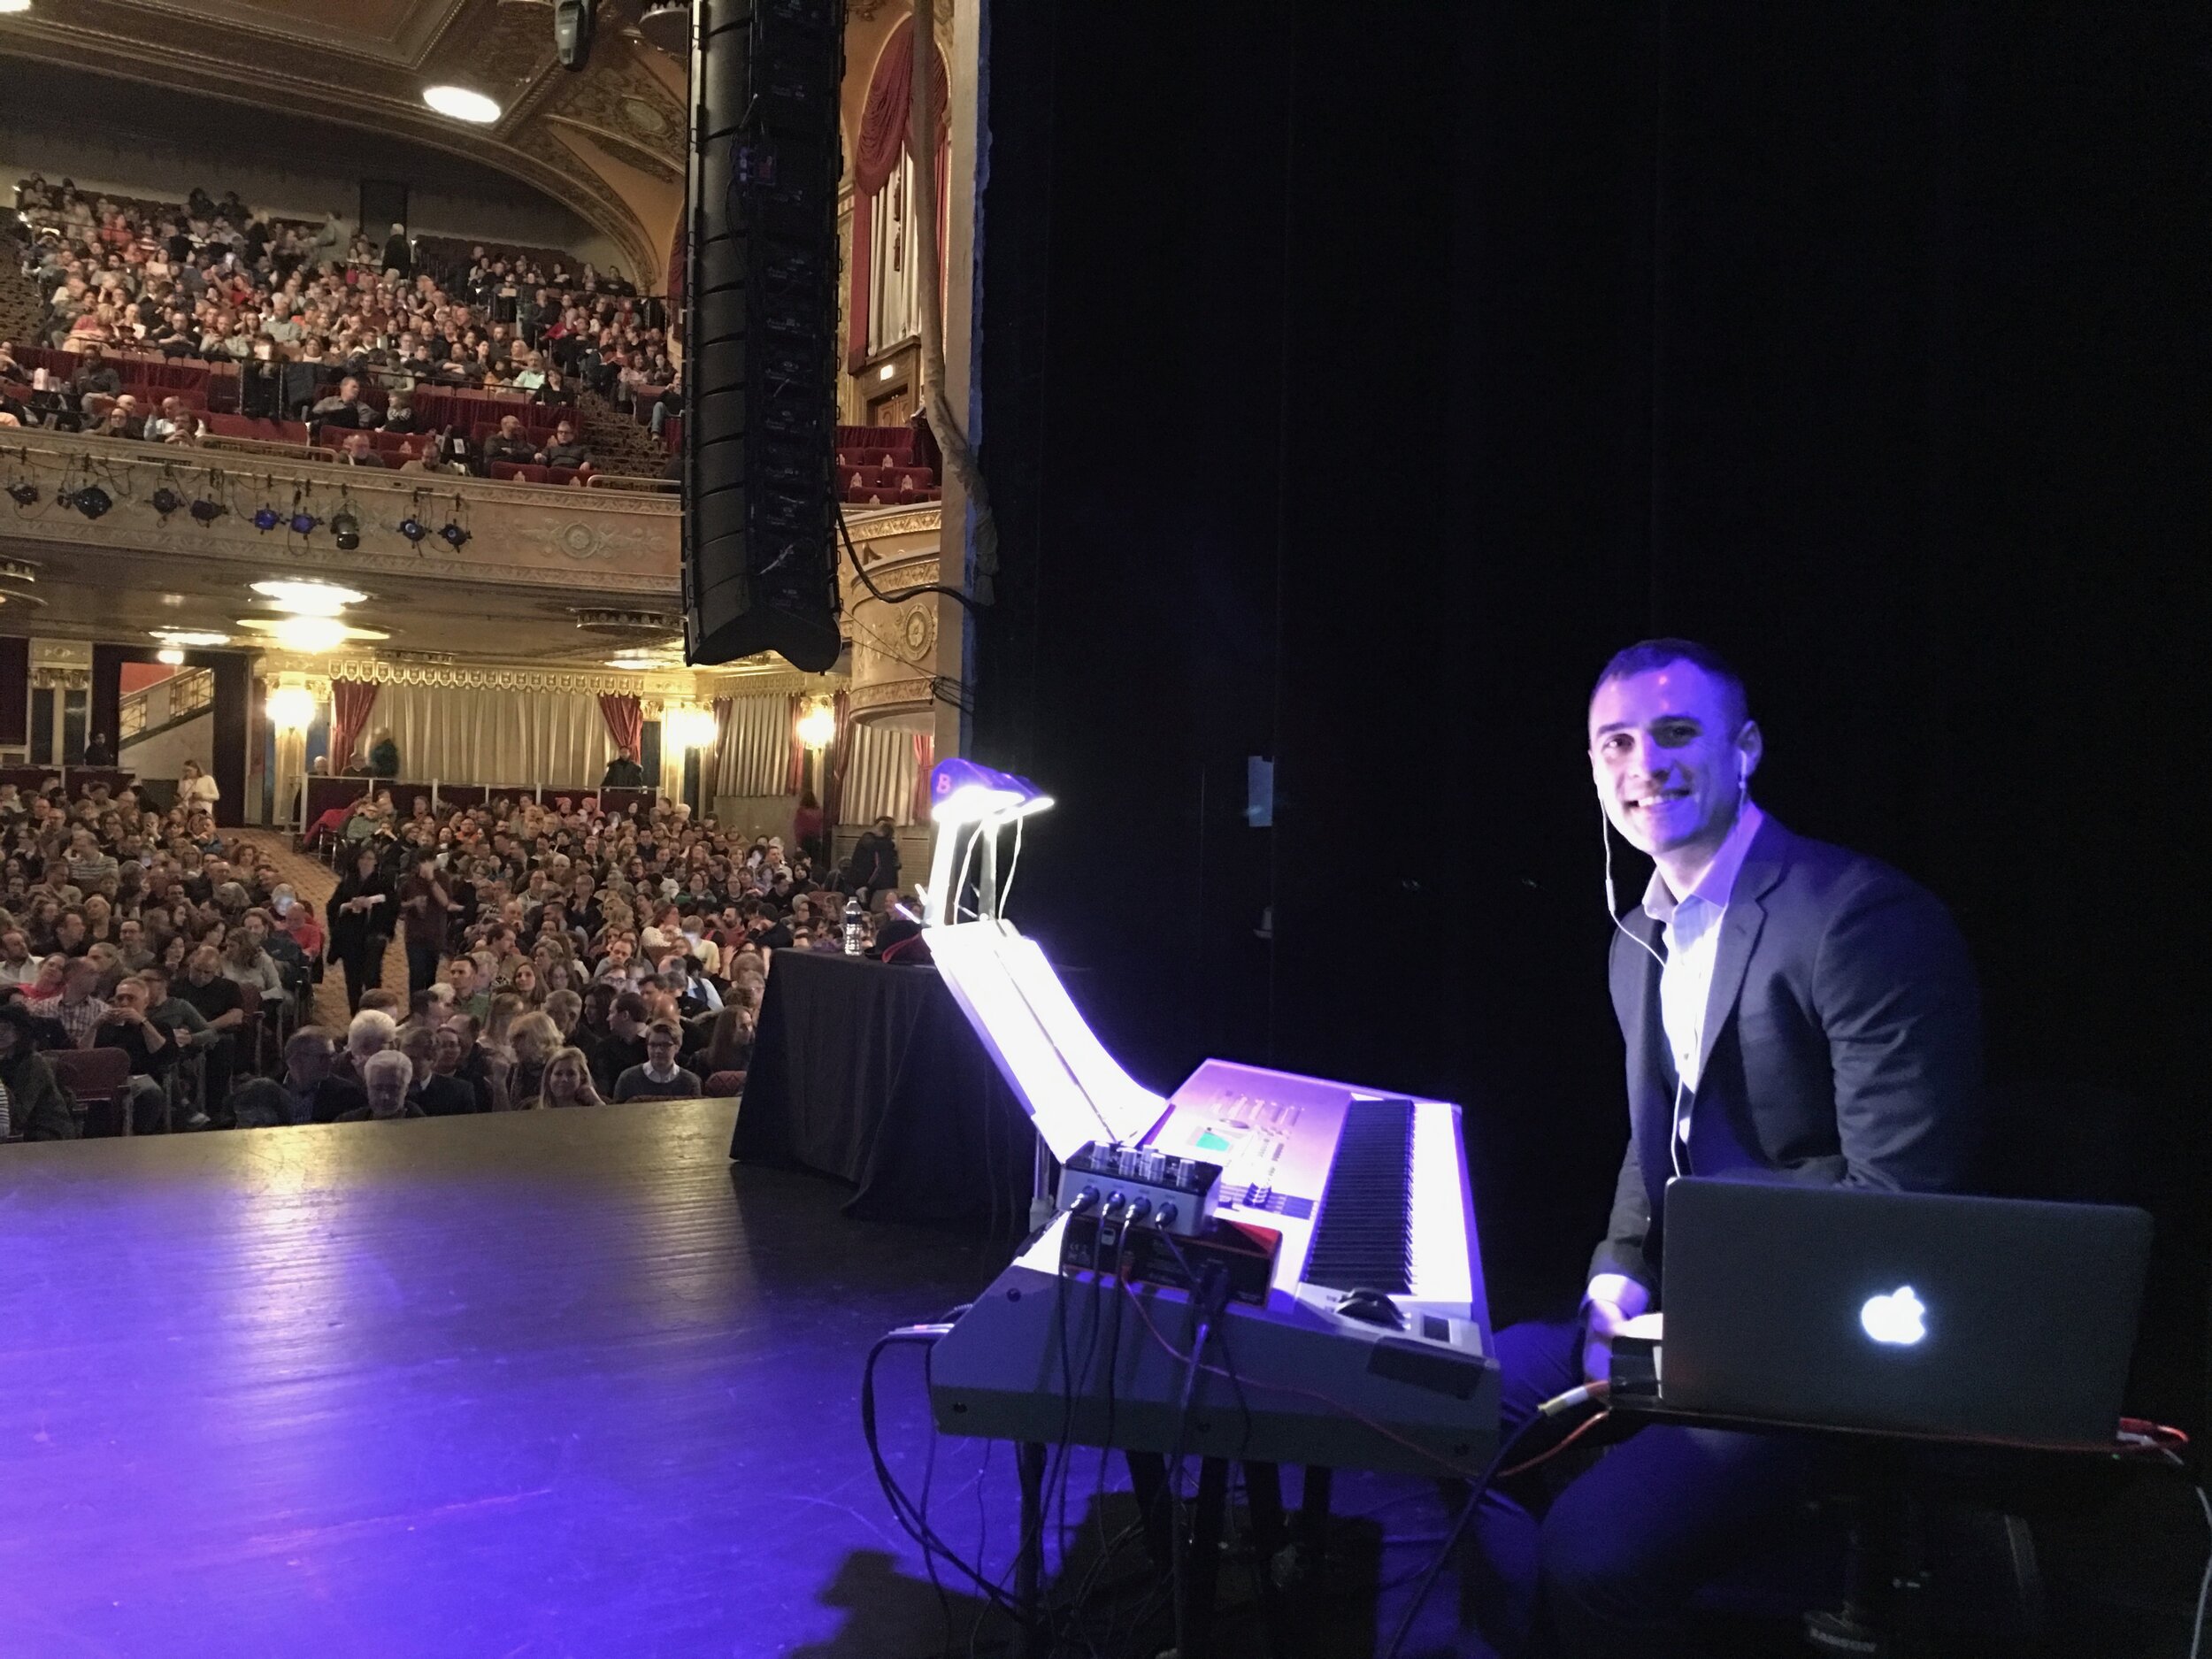  Sold out house in Boston, MA for  Randy Rainbow: Live! , July 2019 